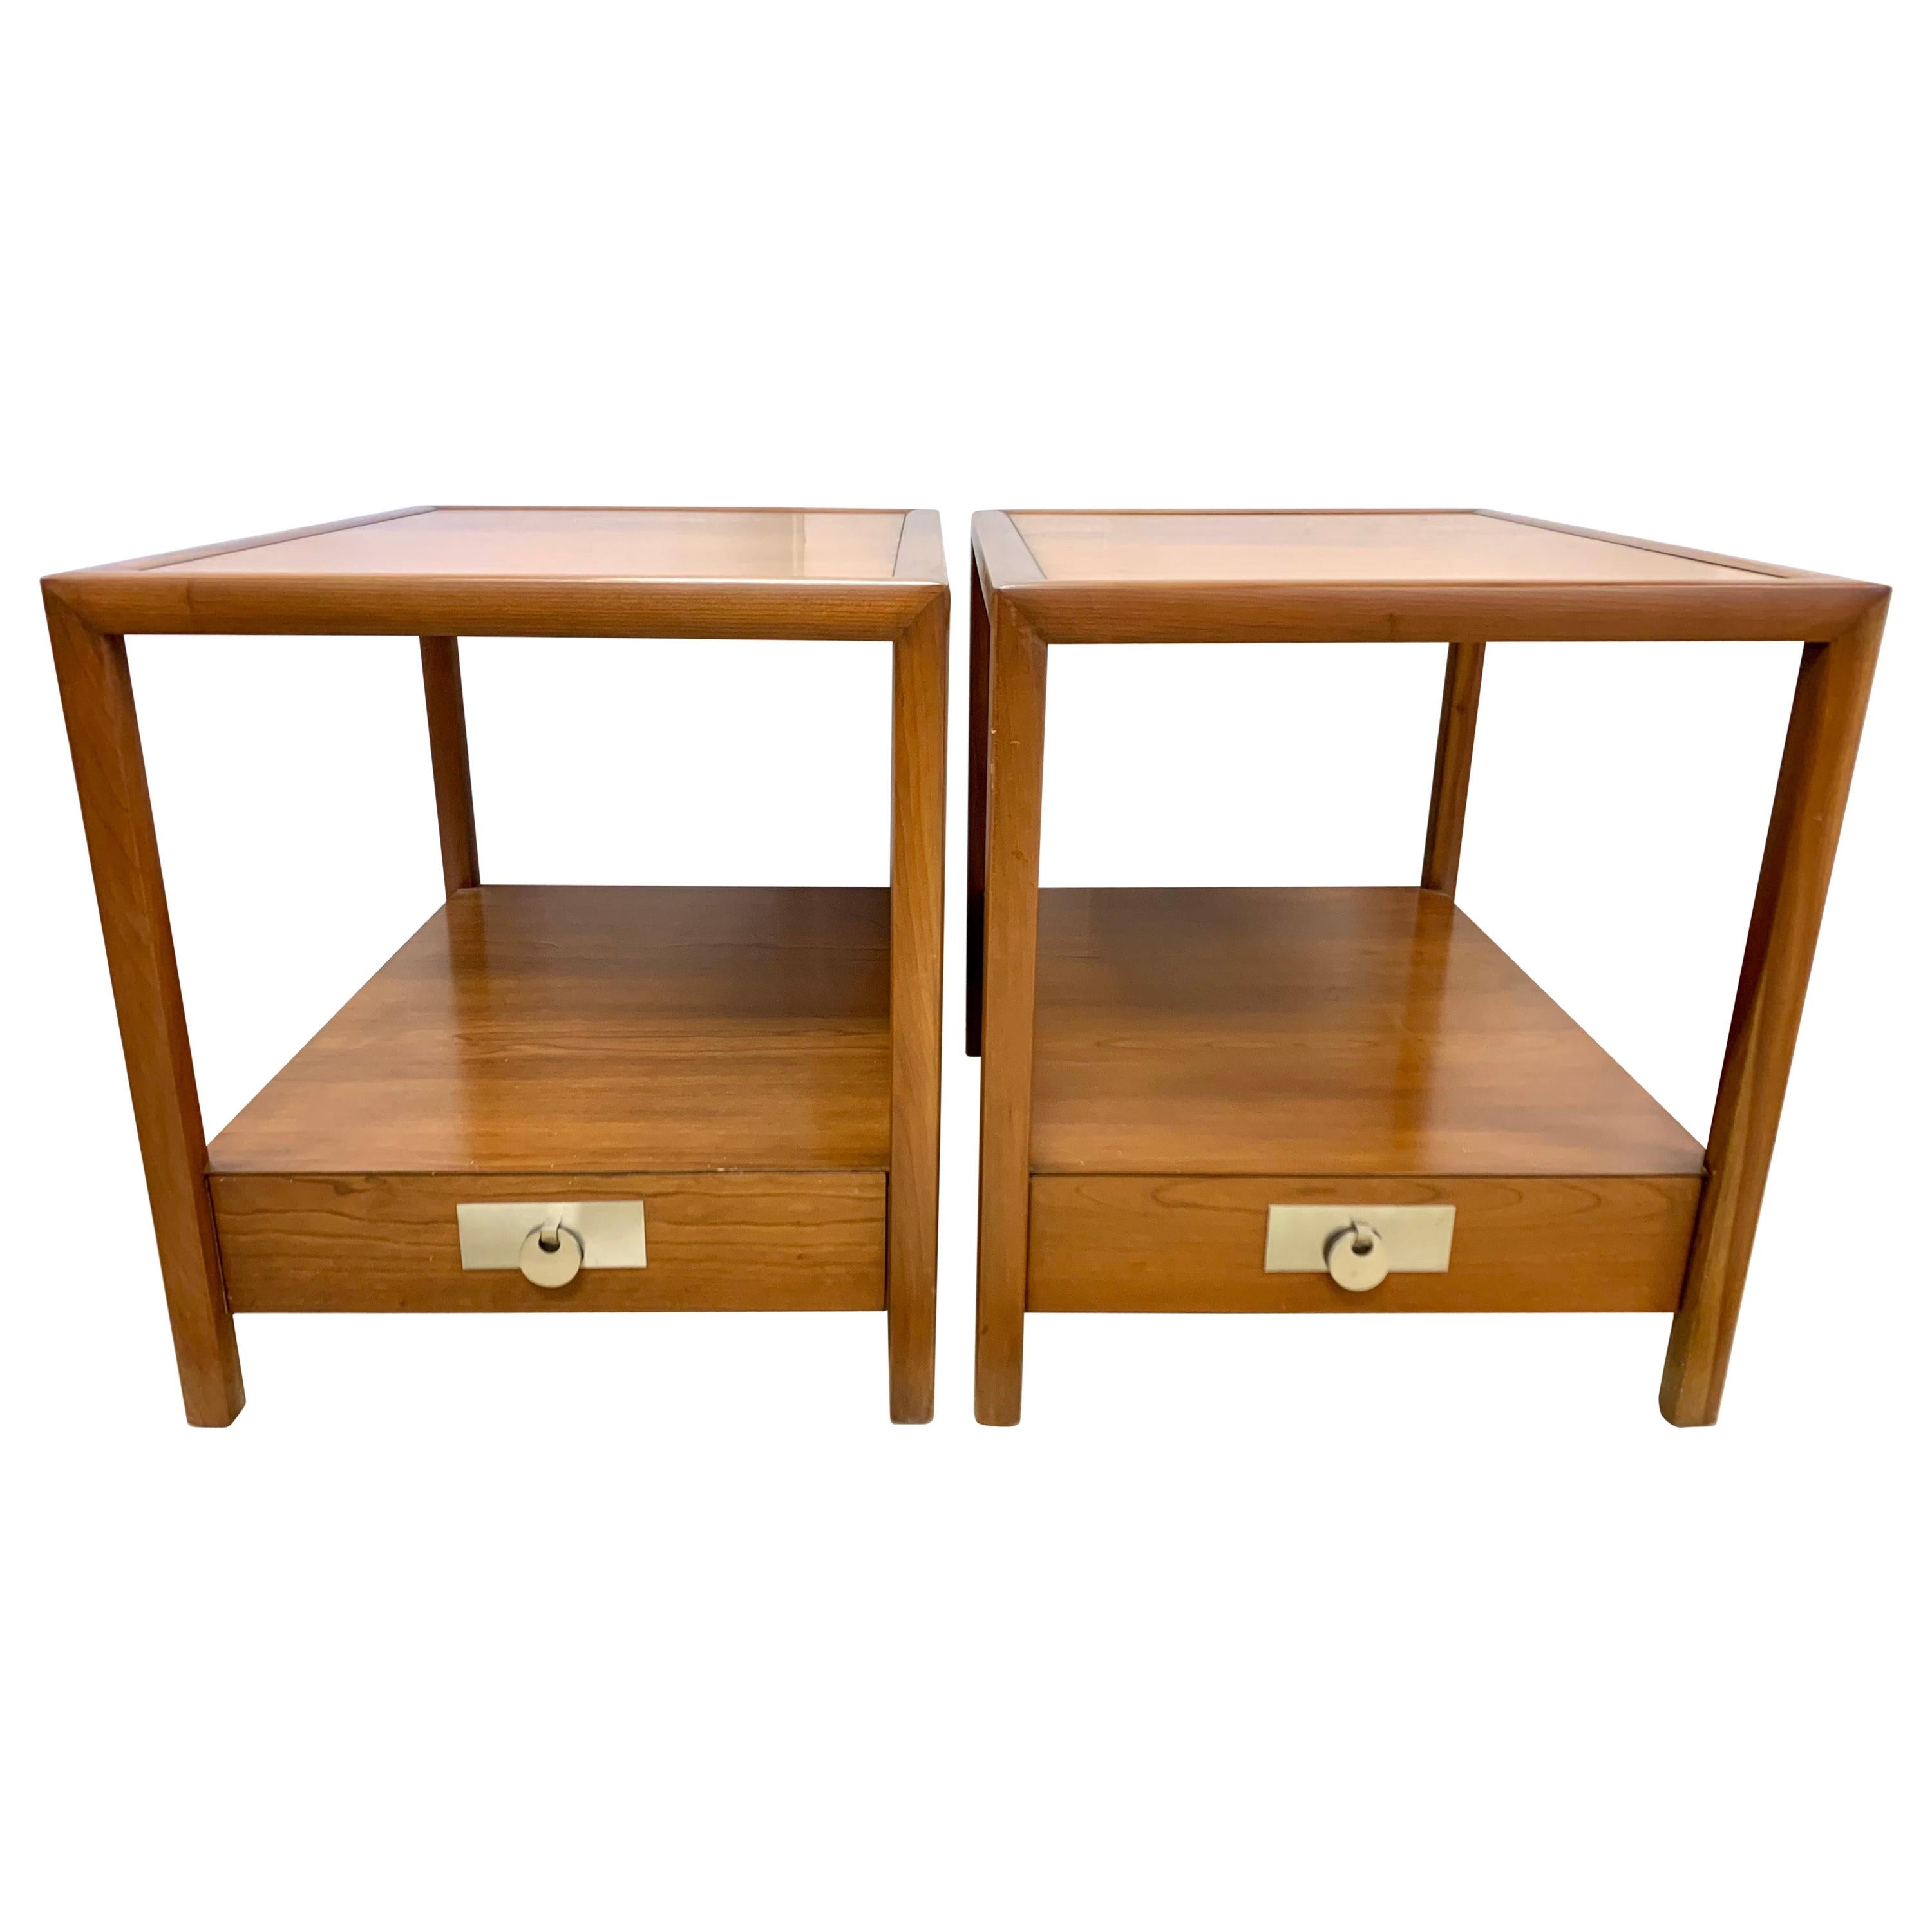 Pair of Rectangular Lamp Tables by Michael Taylor for Baker Furniture New World